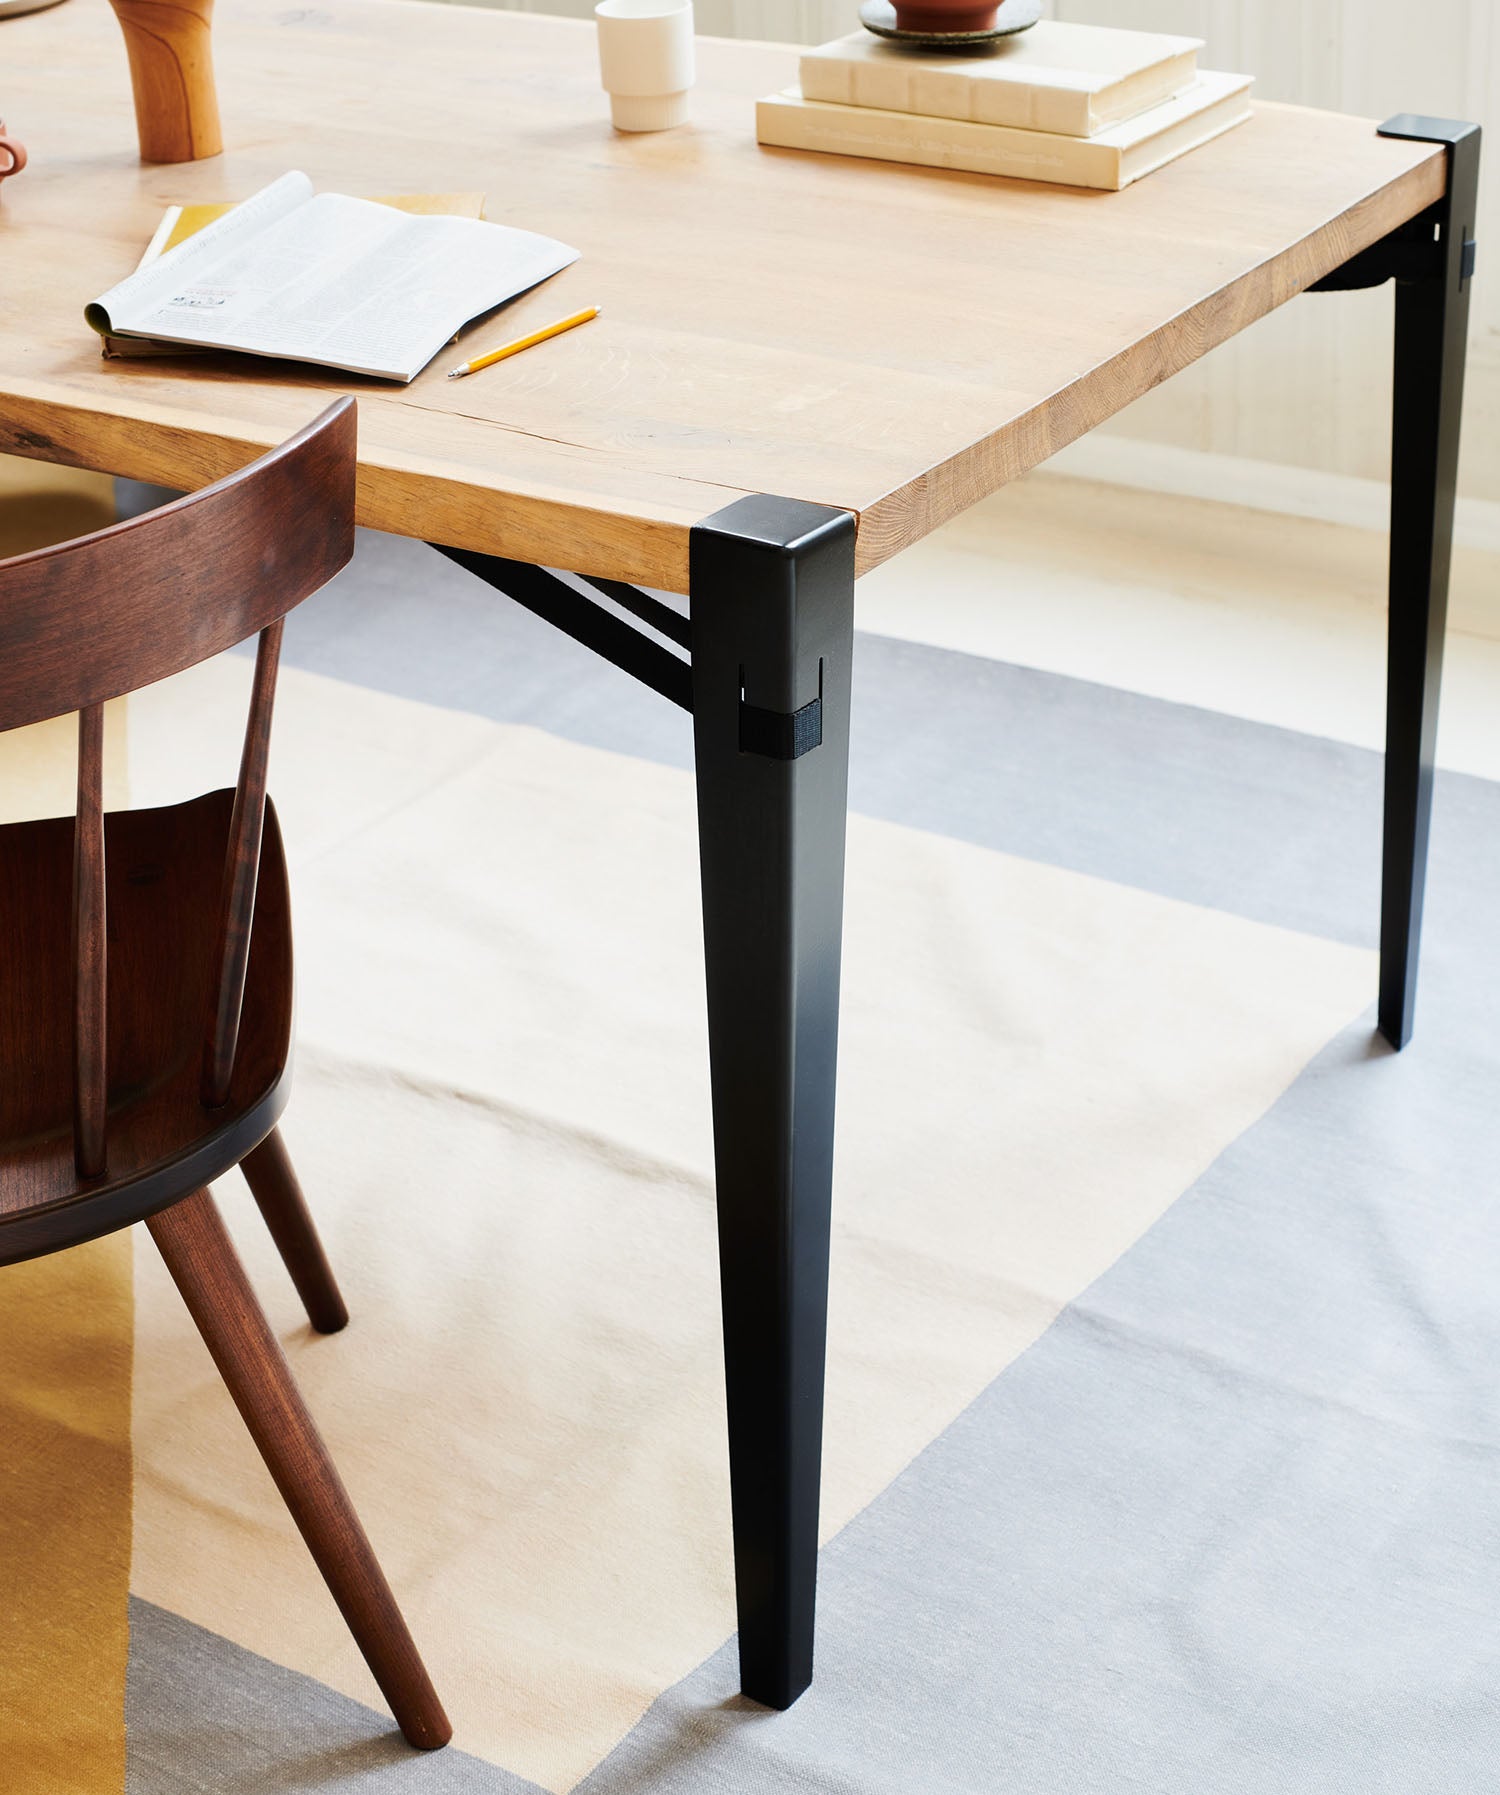 The Utility Set: Make Your Own Table with Our Steel Legs